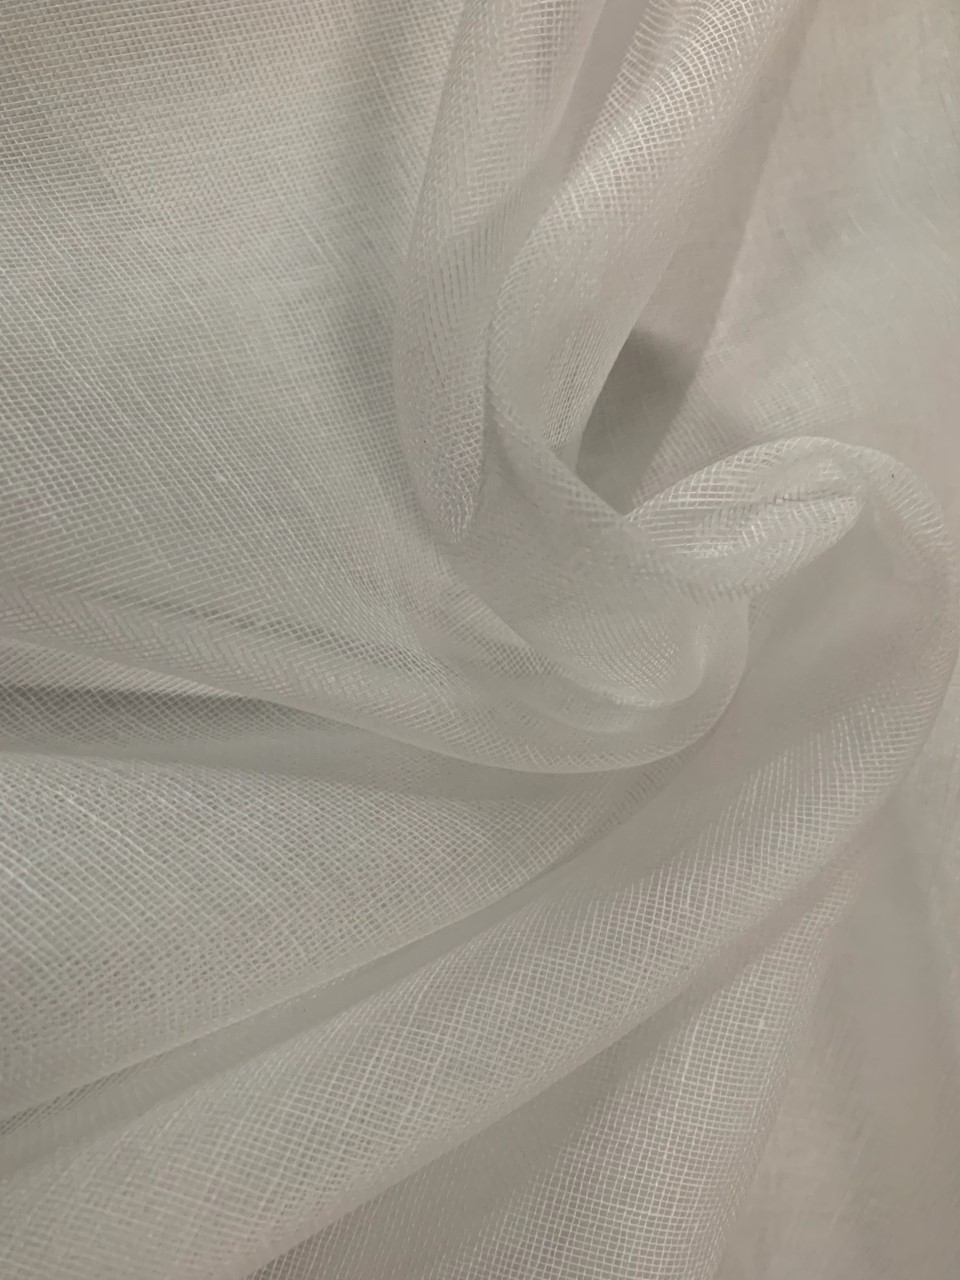 30 Wide Grade 60 Bleached Cheesecloth 1000 Yard Roll